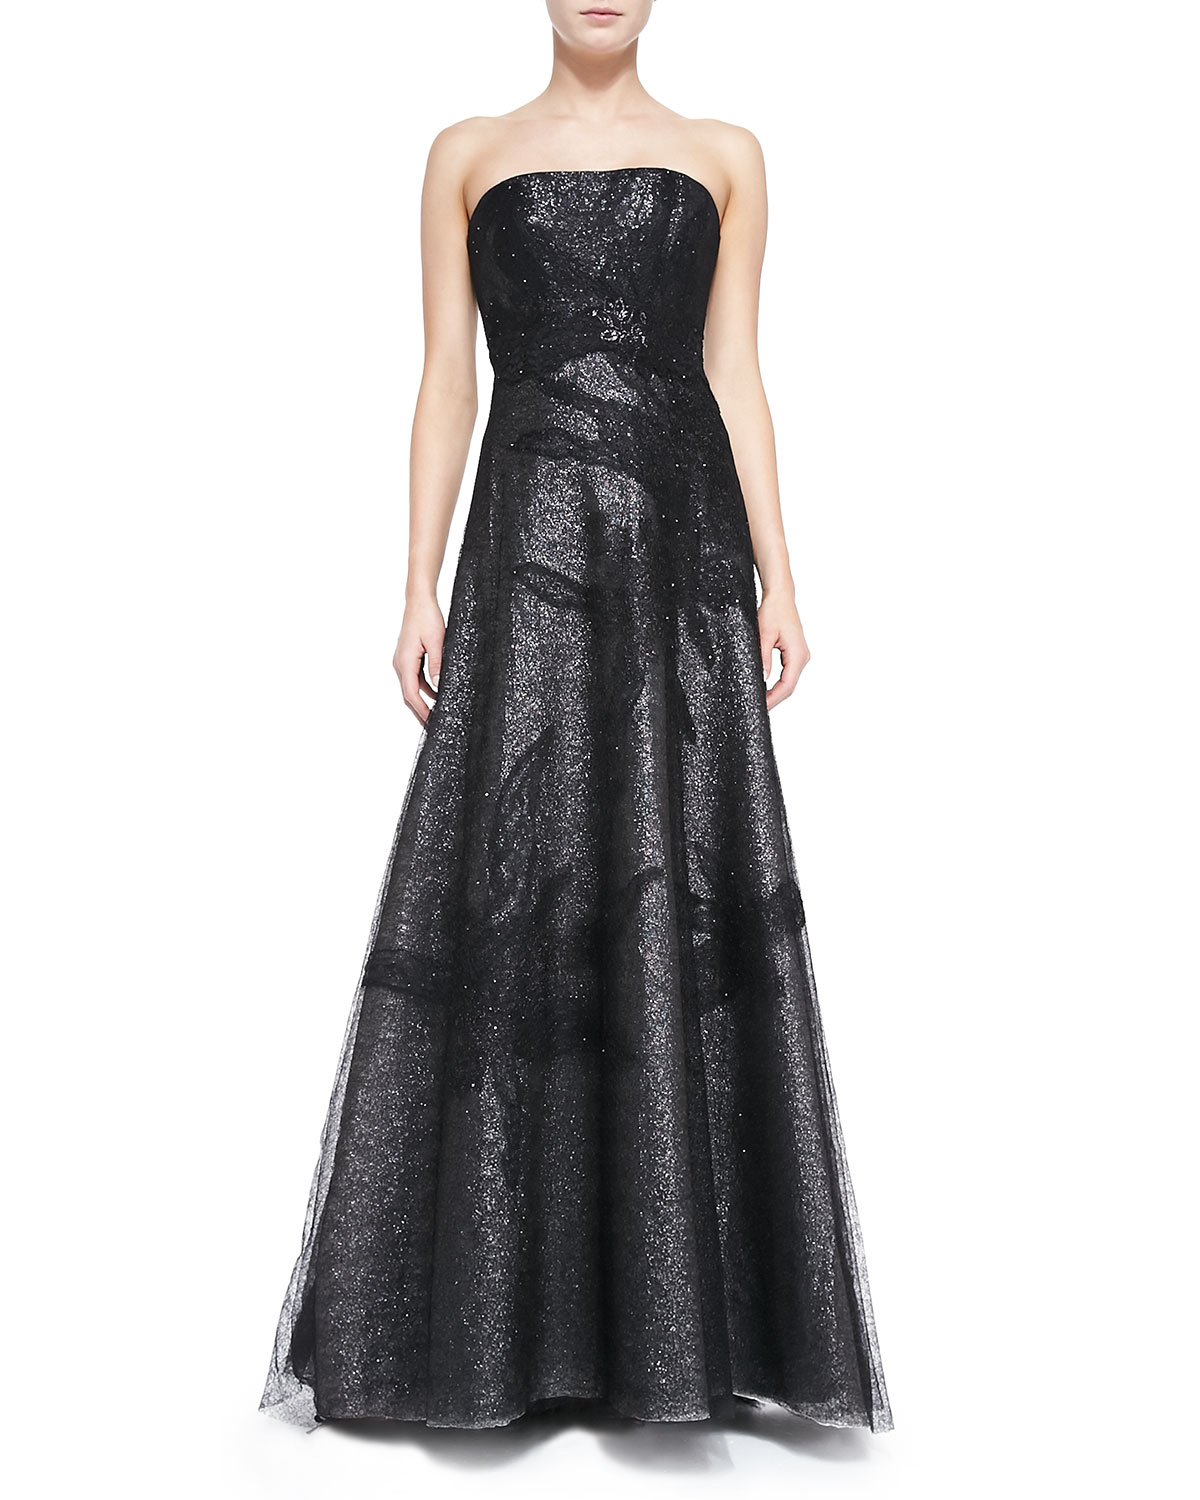 Lyst - Rene Ruiz Strapless Gown With Lace Overlay Skirt in Black